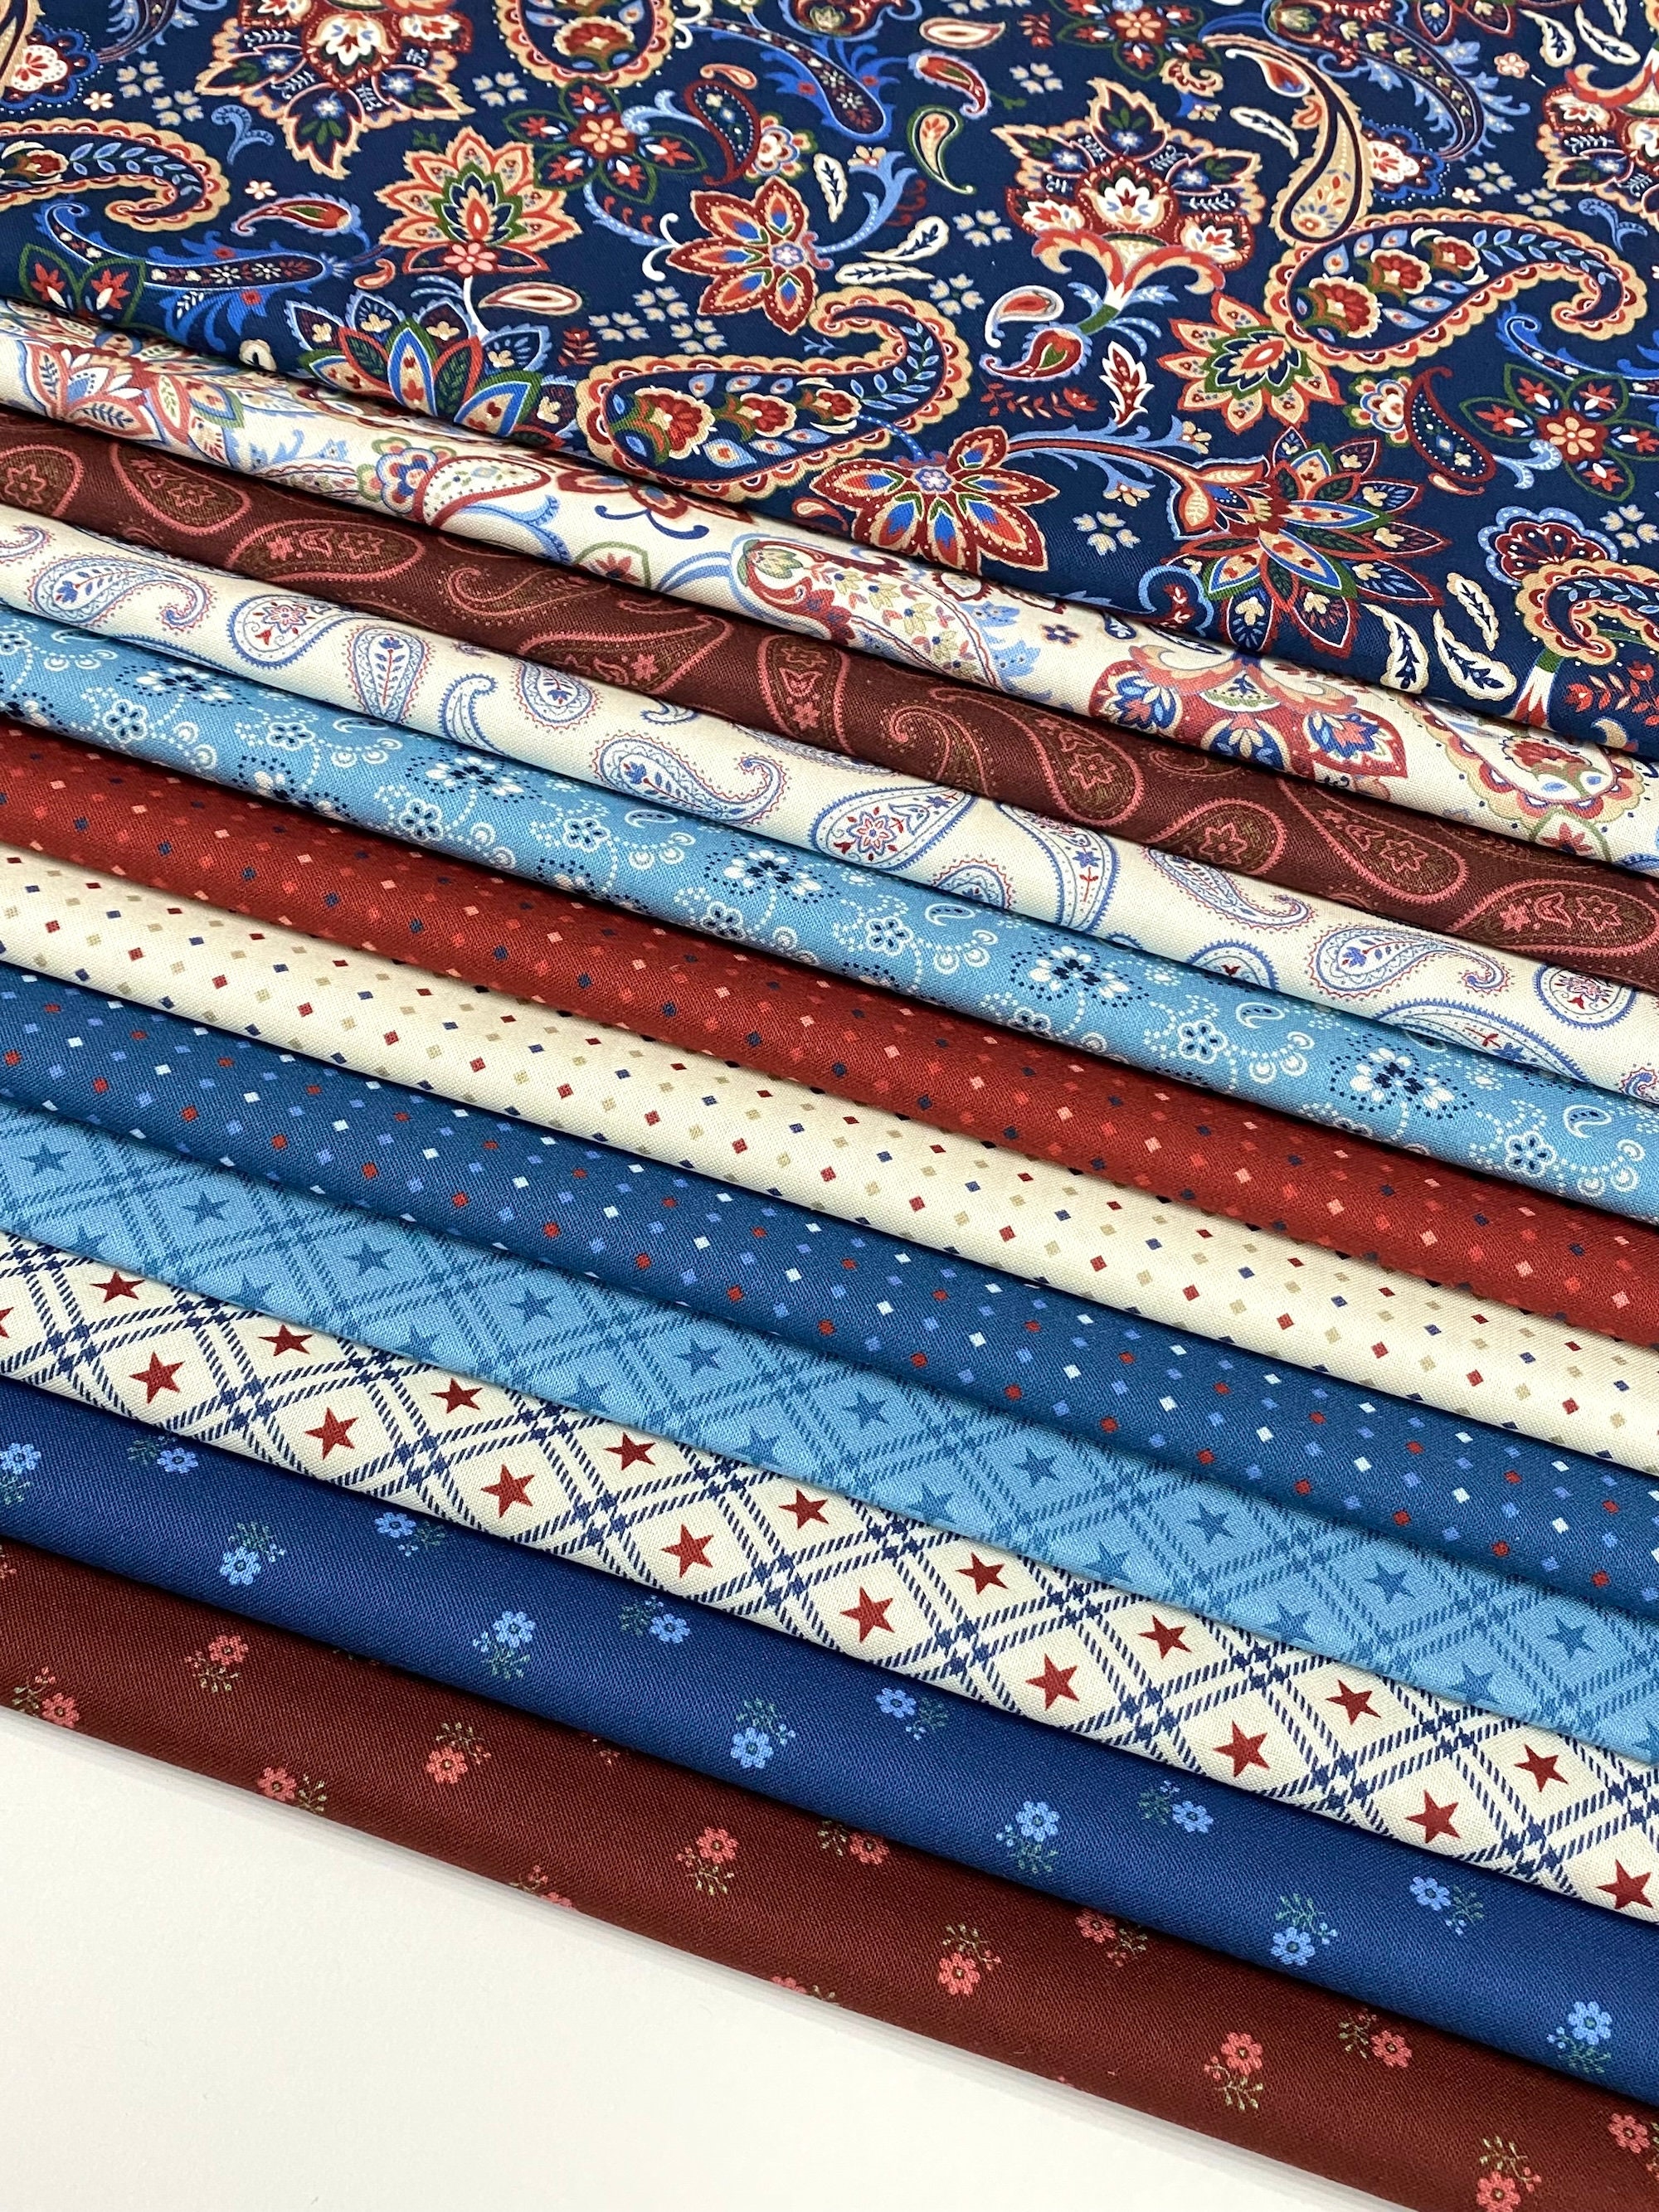 Fields 10 Fat Quarters - Assorted Moda French General France Calico Floral  Flowers Red Pink Blue Cream Classic Reproduction Quality Quilters Cotton